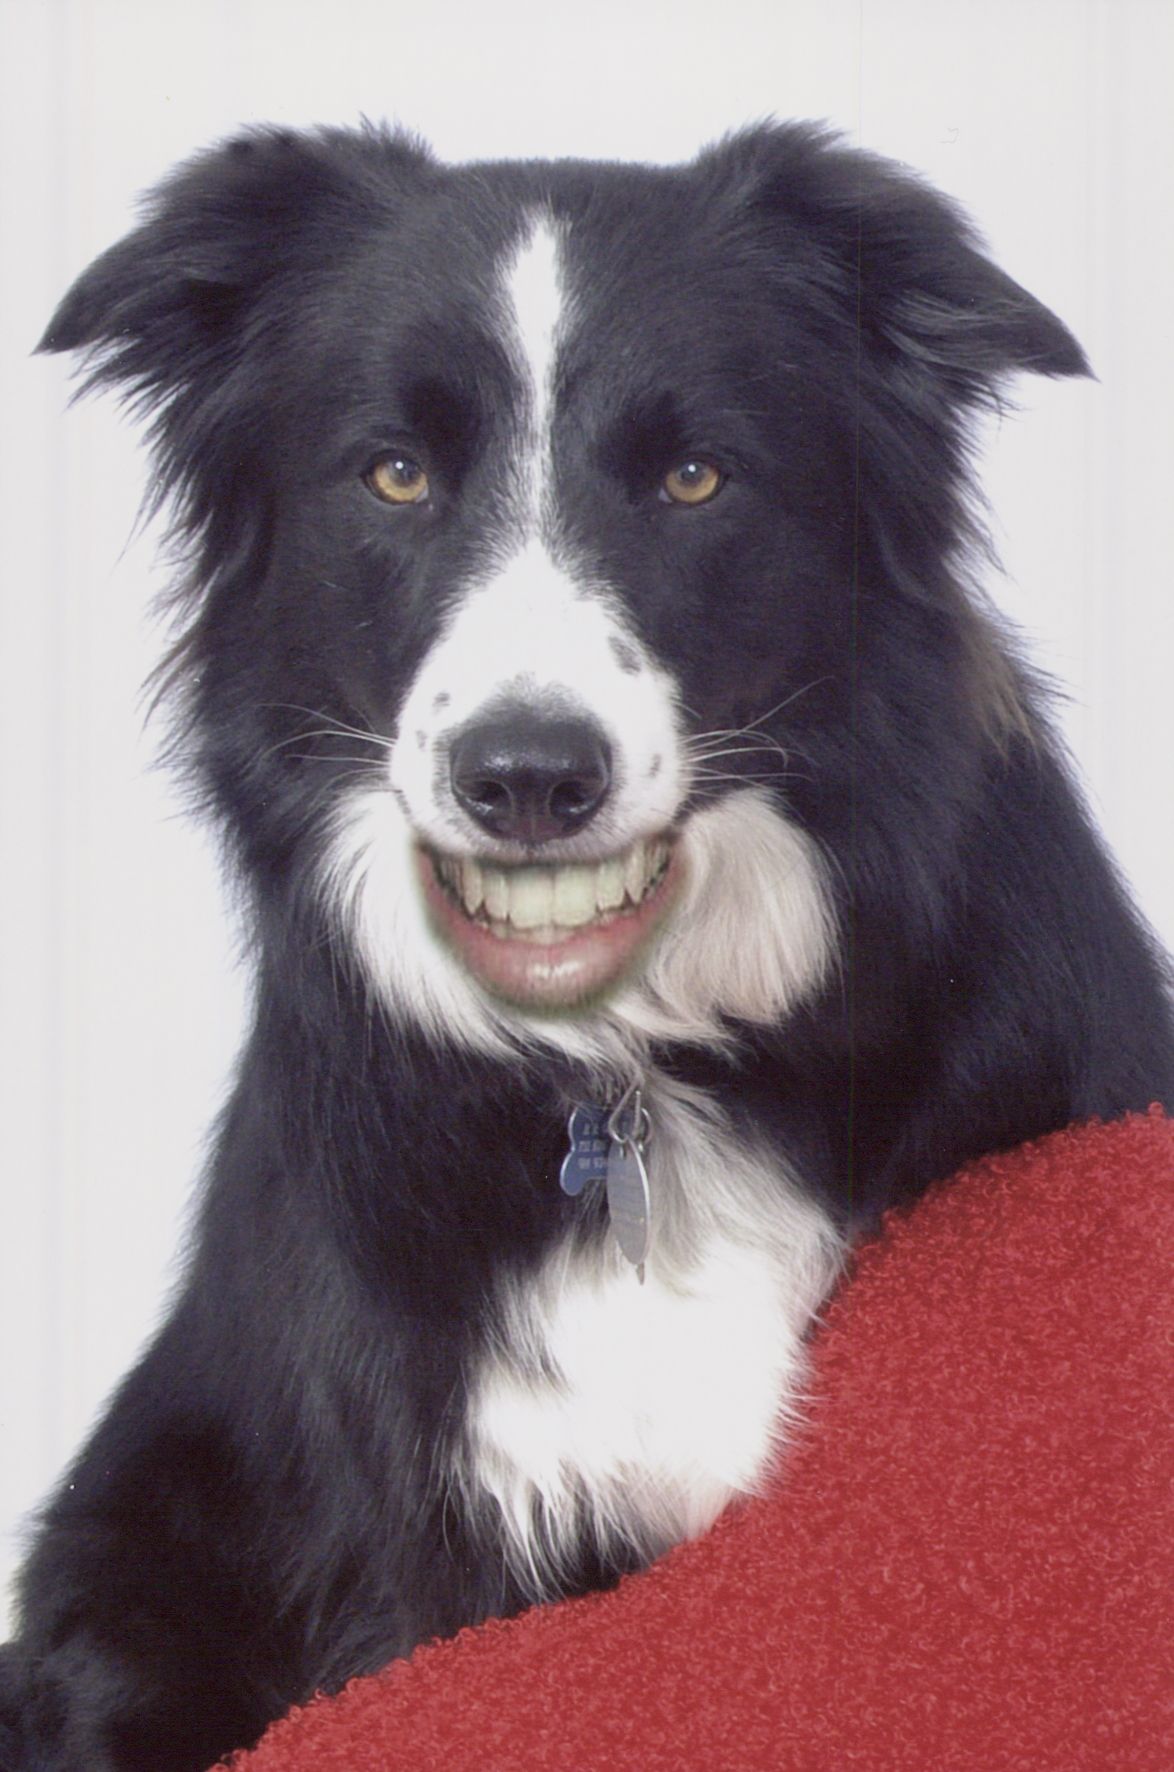 Image of a dog with teeth